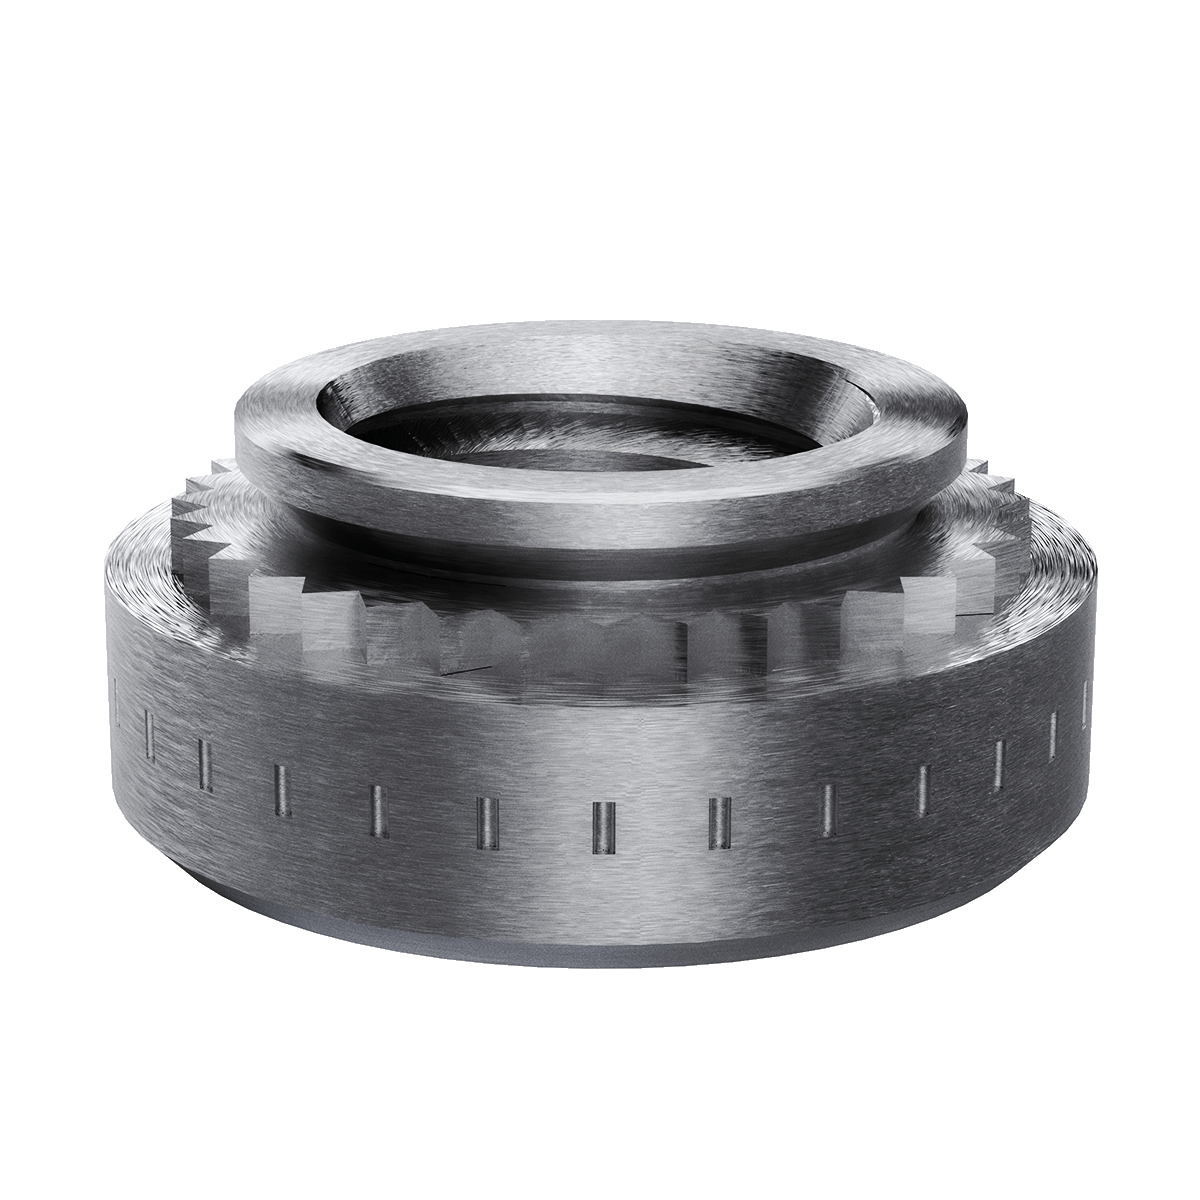 Self-Clinching Nut, For SS, 17-4 Stainless Steel, Passivated, 1/4-20 x 2, 50 Pack